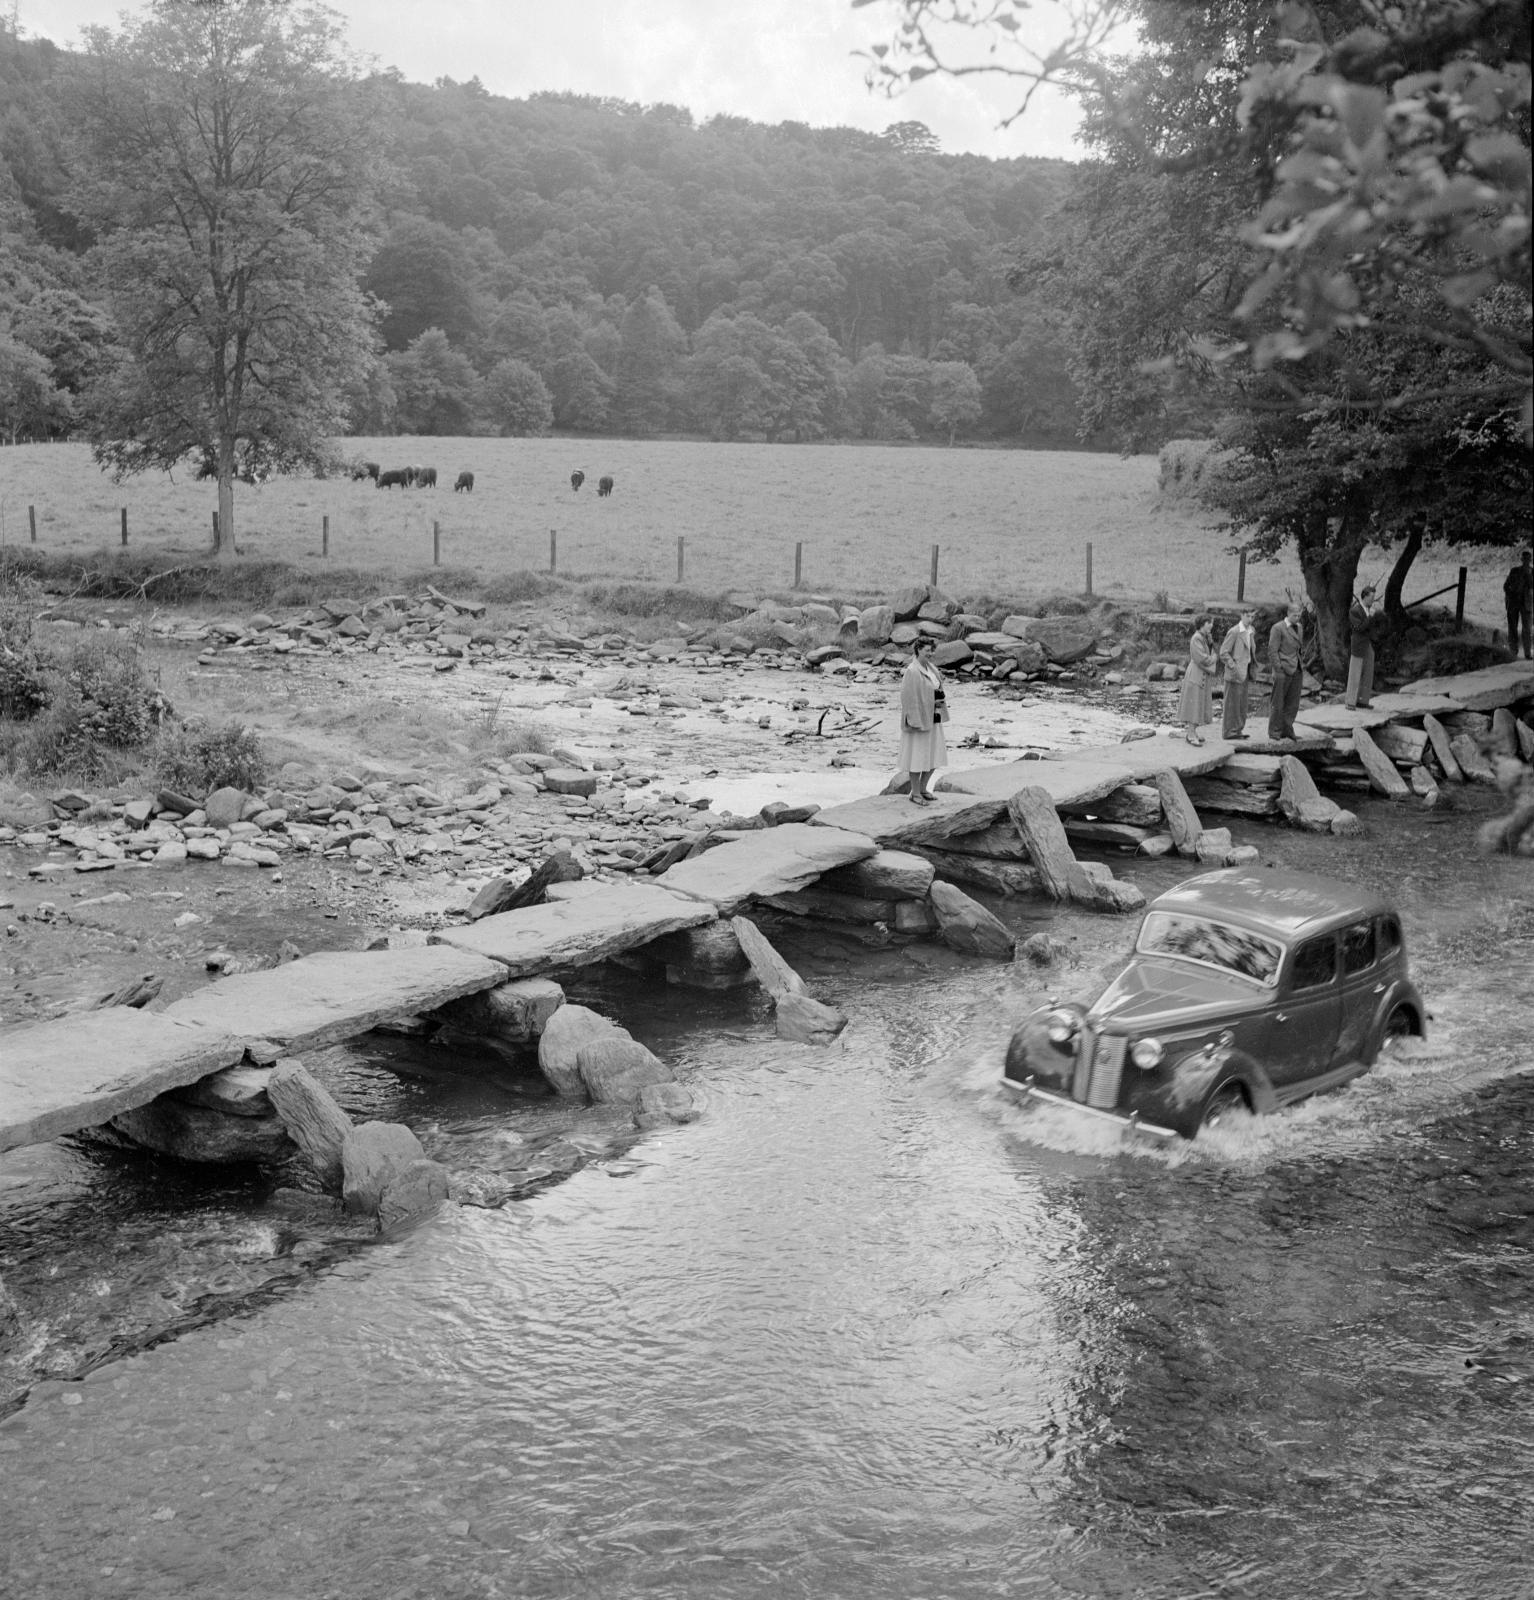 A view of the Tarr Steps stone clapper bridge over the river Barle in Somerset, which dates from the medieval period.